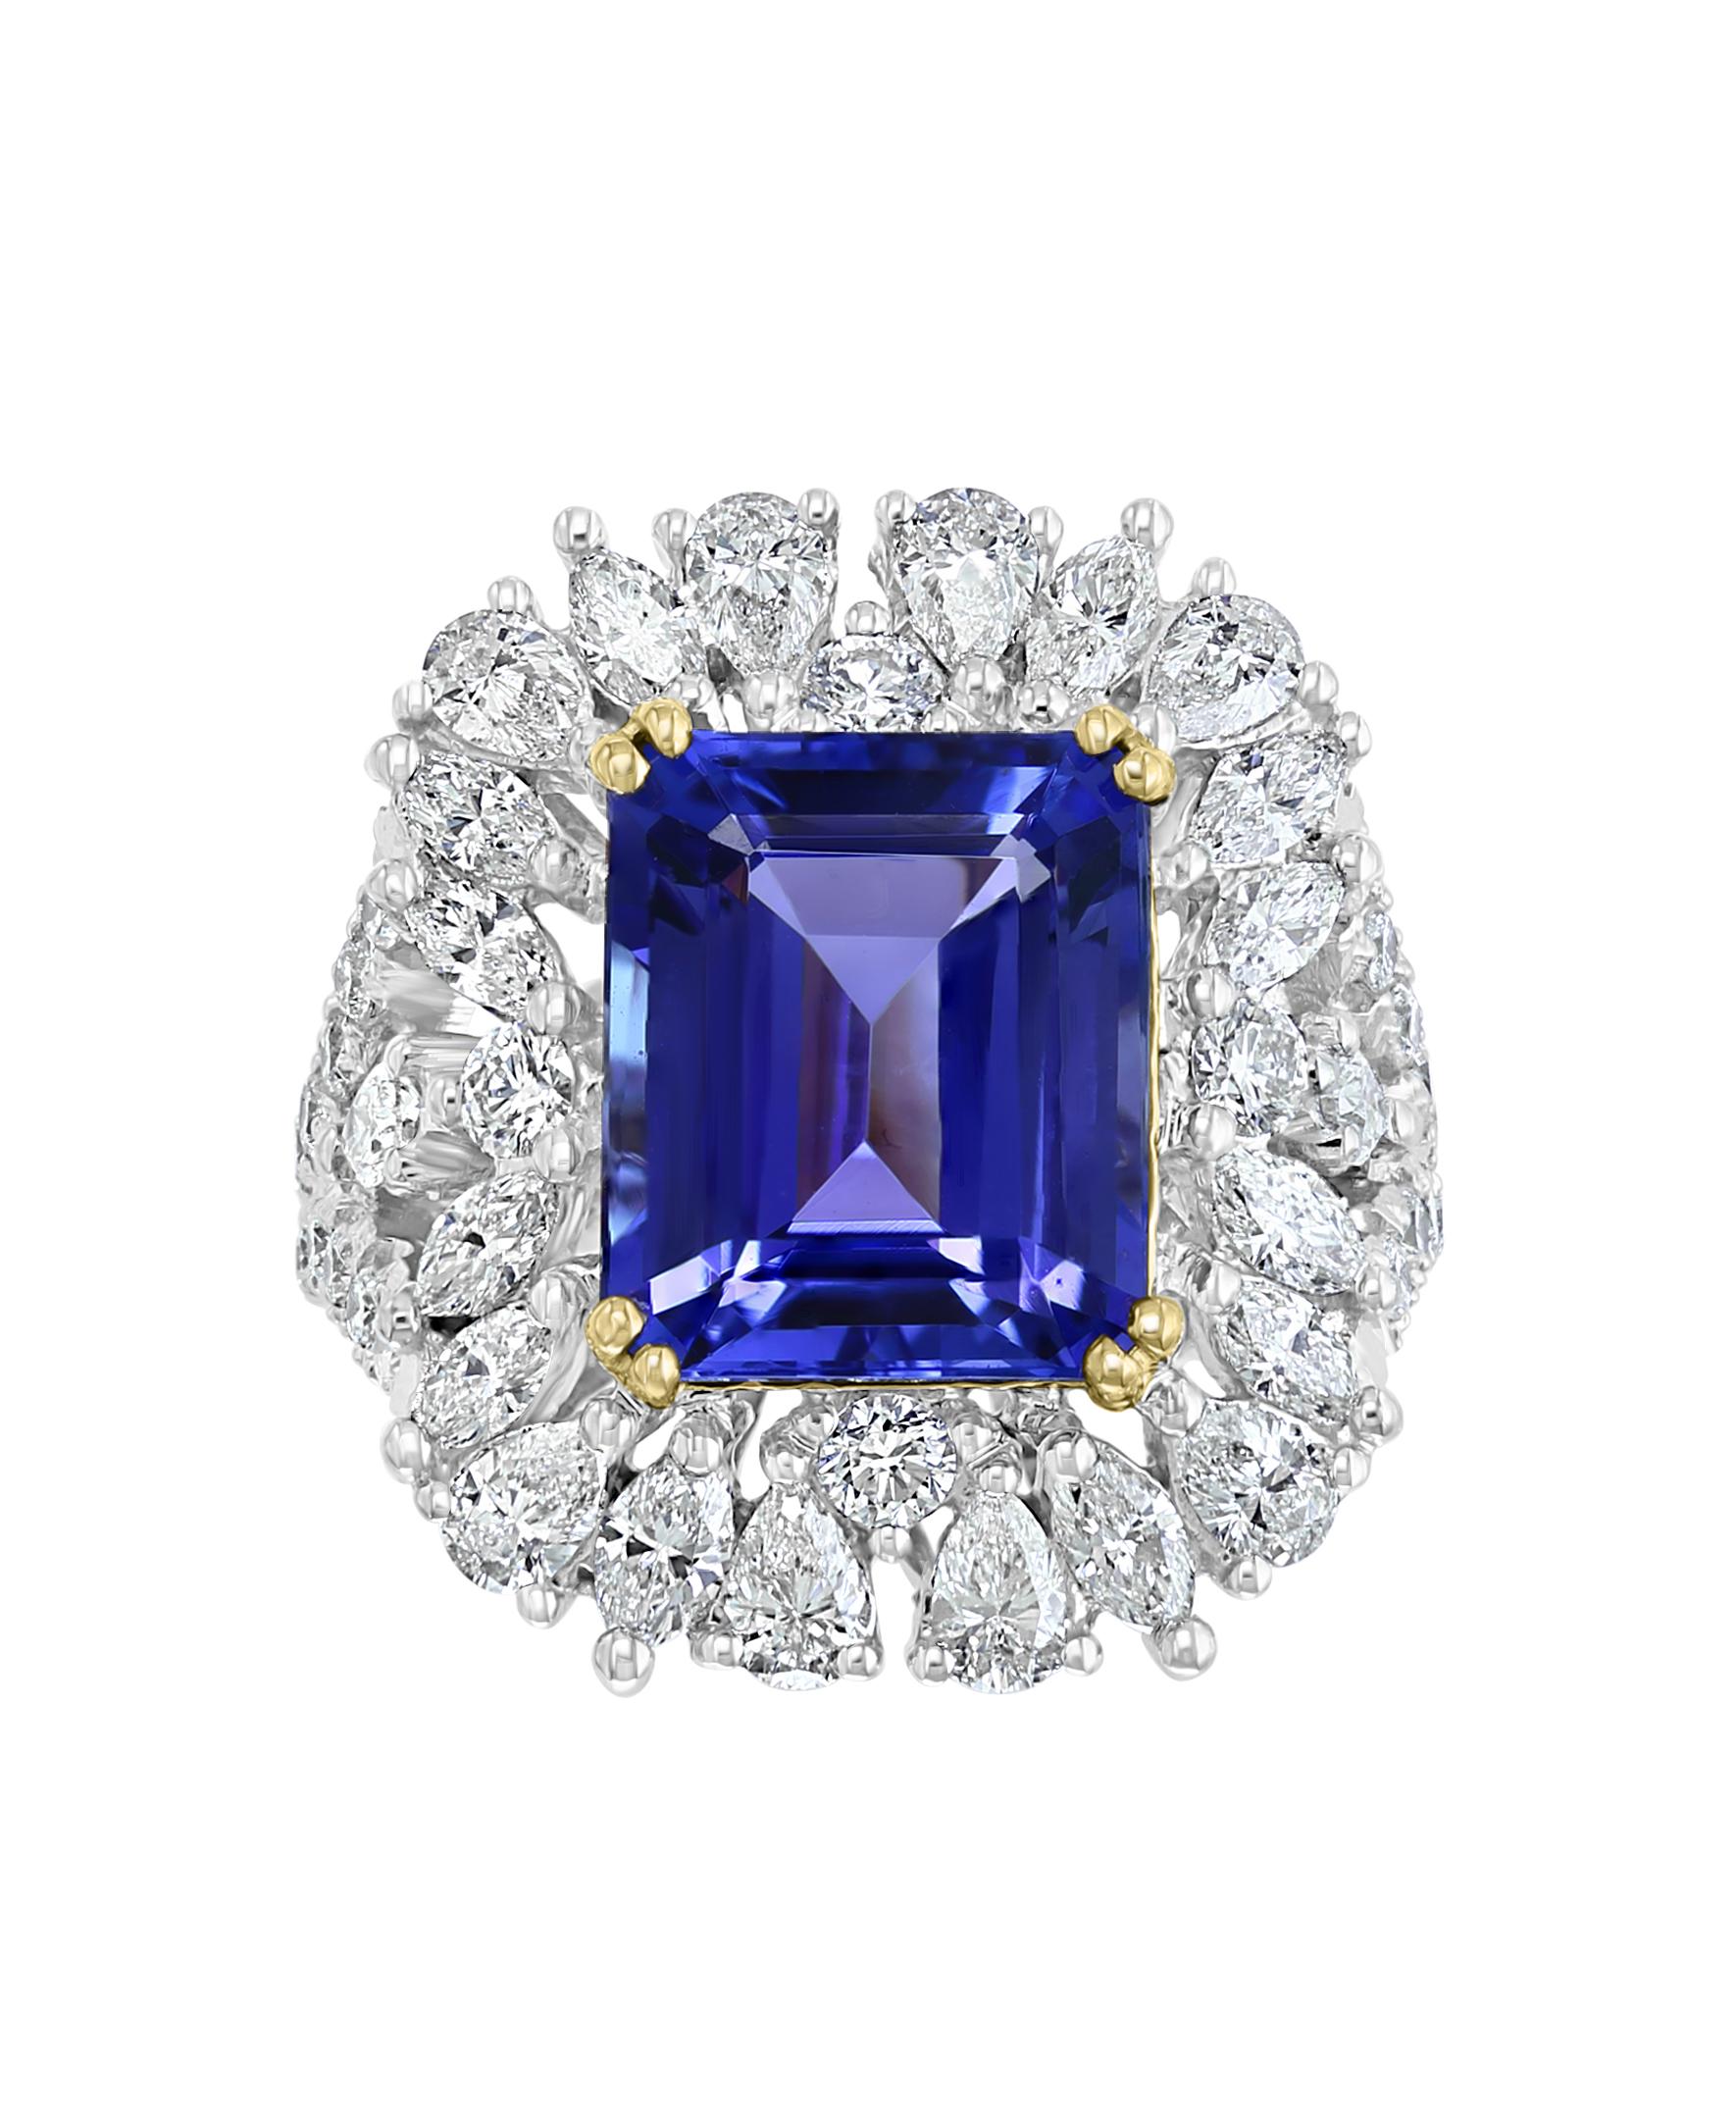 A truly magnificent design that combines so many shapes of stones that converge to hug the center stone Tanzanite.
This Effy Hematian design ring is set in 18K White gold, with 18K Yellow gold prongs holding the Tanzanite stone. The Tanzanite stone